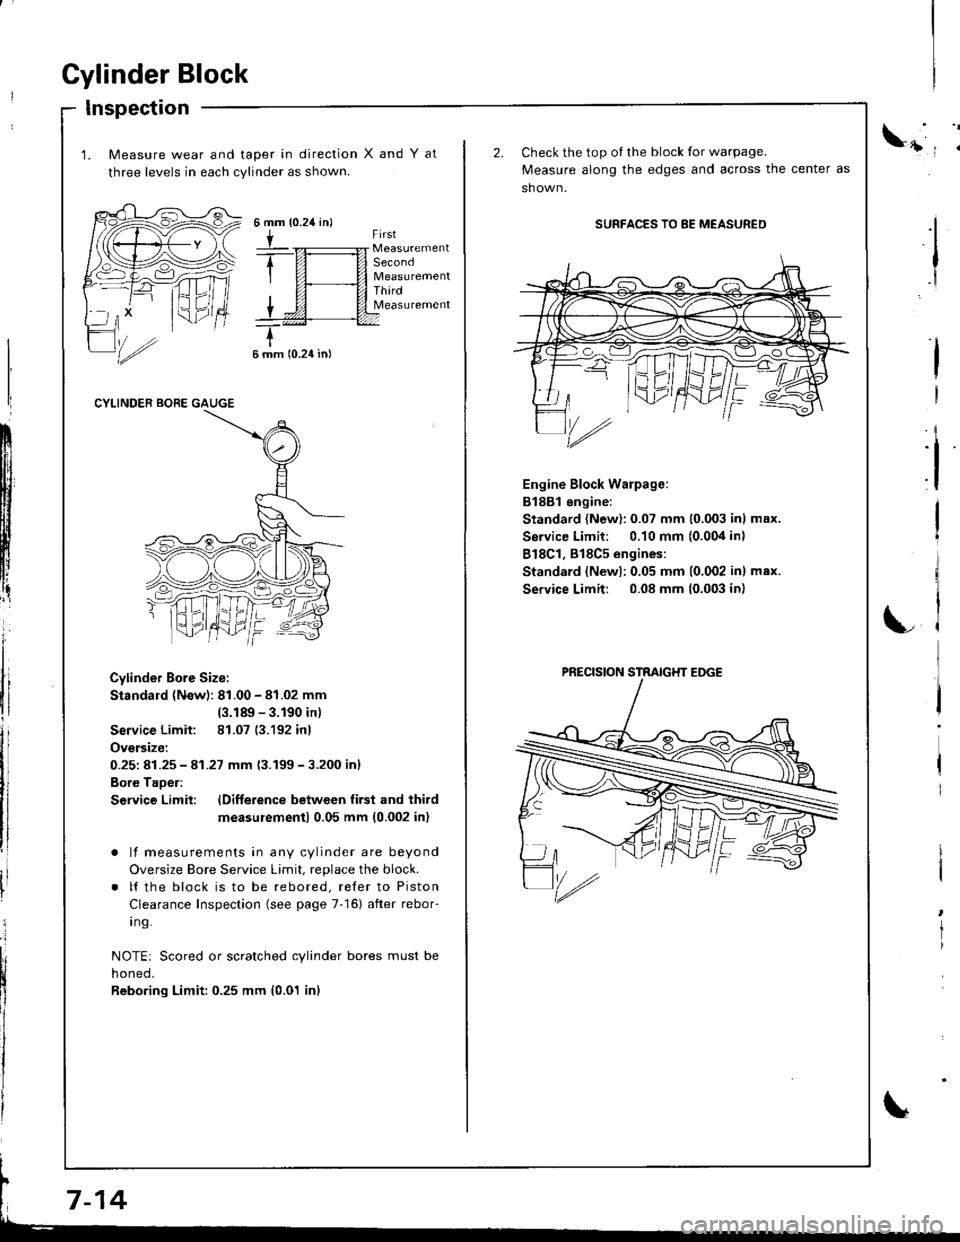 HONDA INTEGRA 1998 4.G Workshop Manual Cylinder Block
Inspection
1. Measure wear and taper in direction
three levels in each cylinder as shown.
XandYat
{0.24 in}6mm
tFirst
Second
ThirdMeasurement
6 mm 10.24 in)
CYLINDER BORE GAUGE
Cylinder